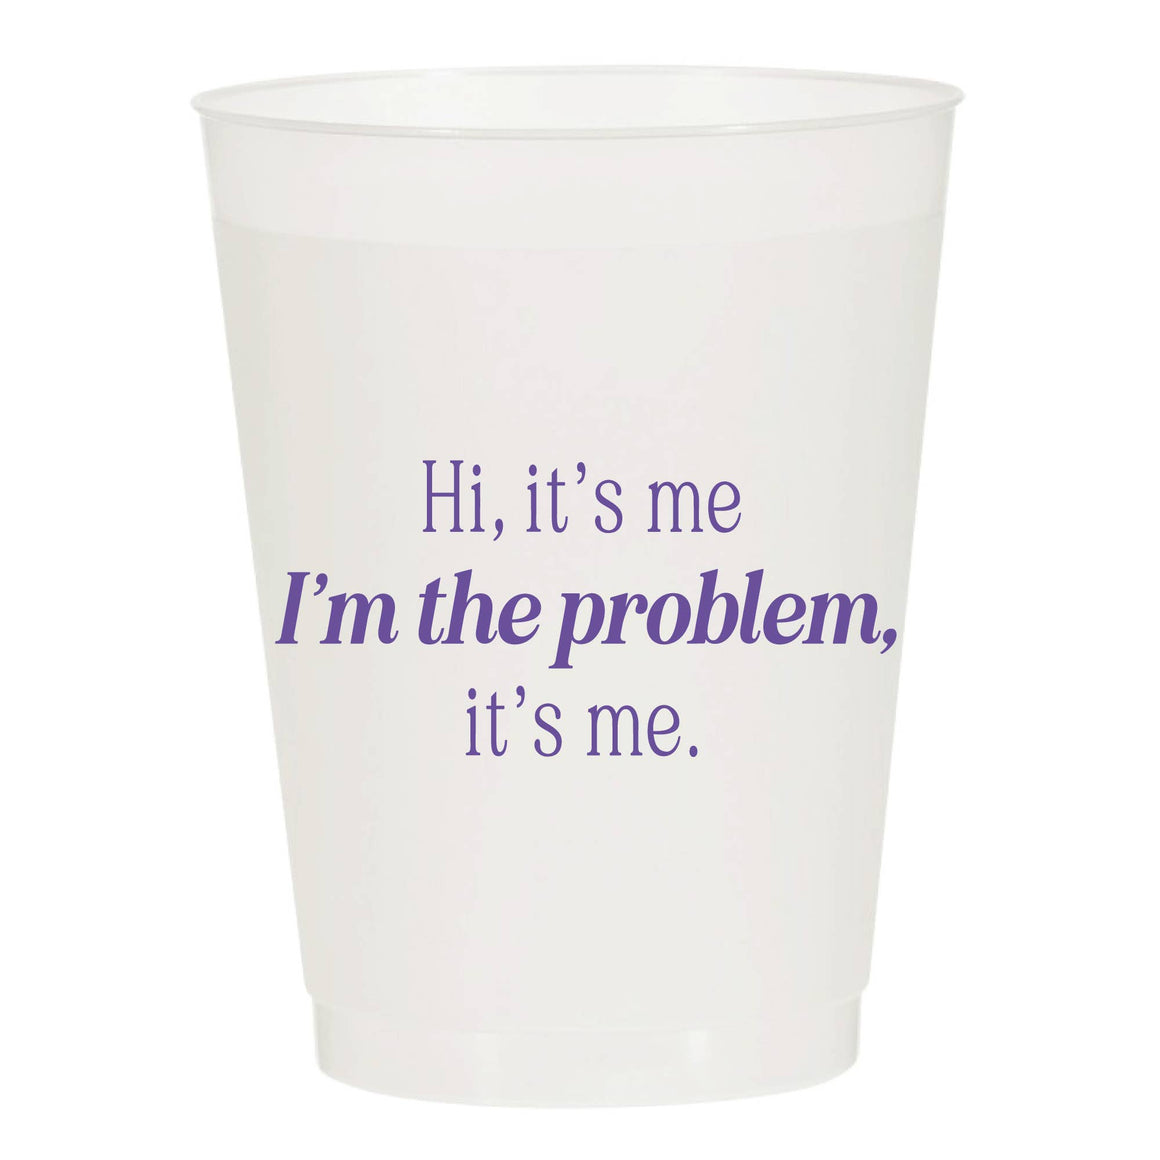 I'm The Problem Reusable Cups | Set of 10